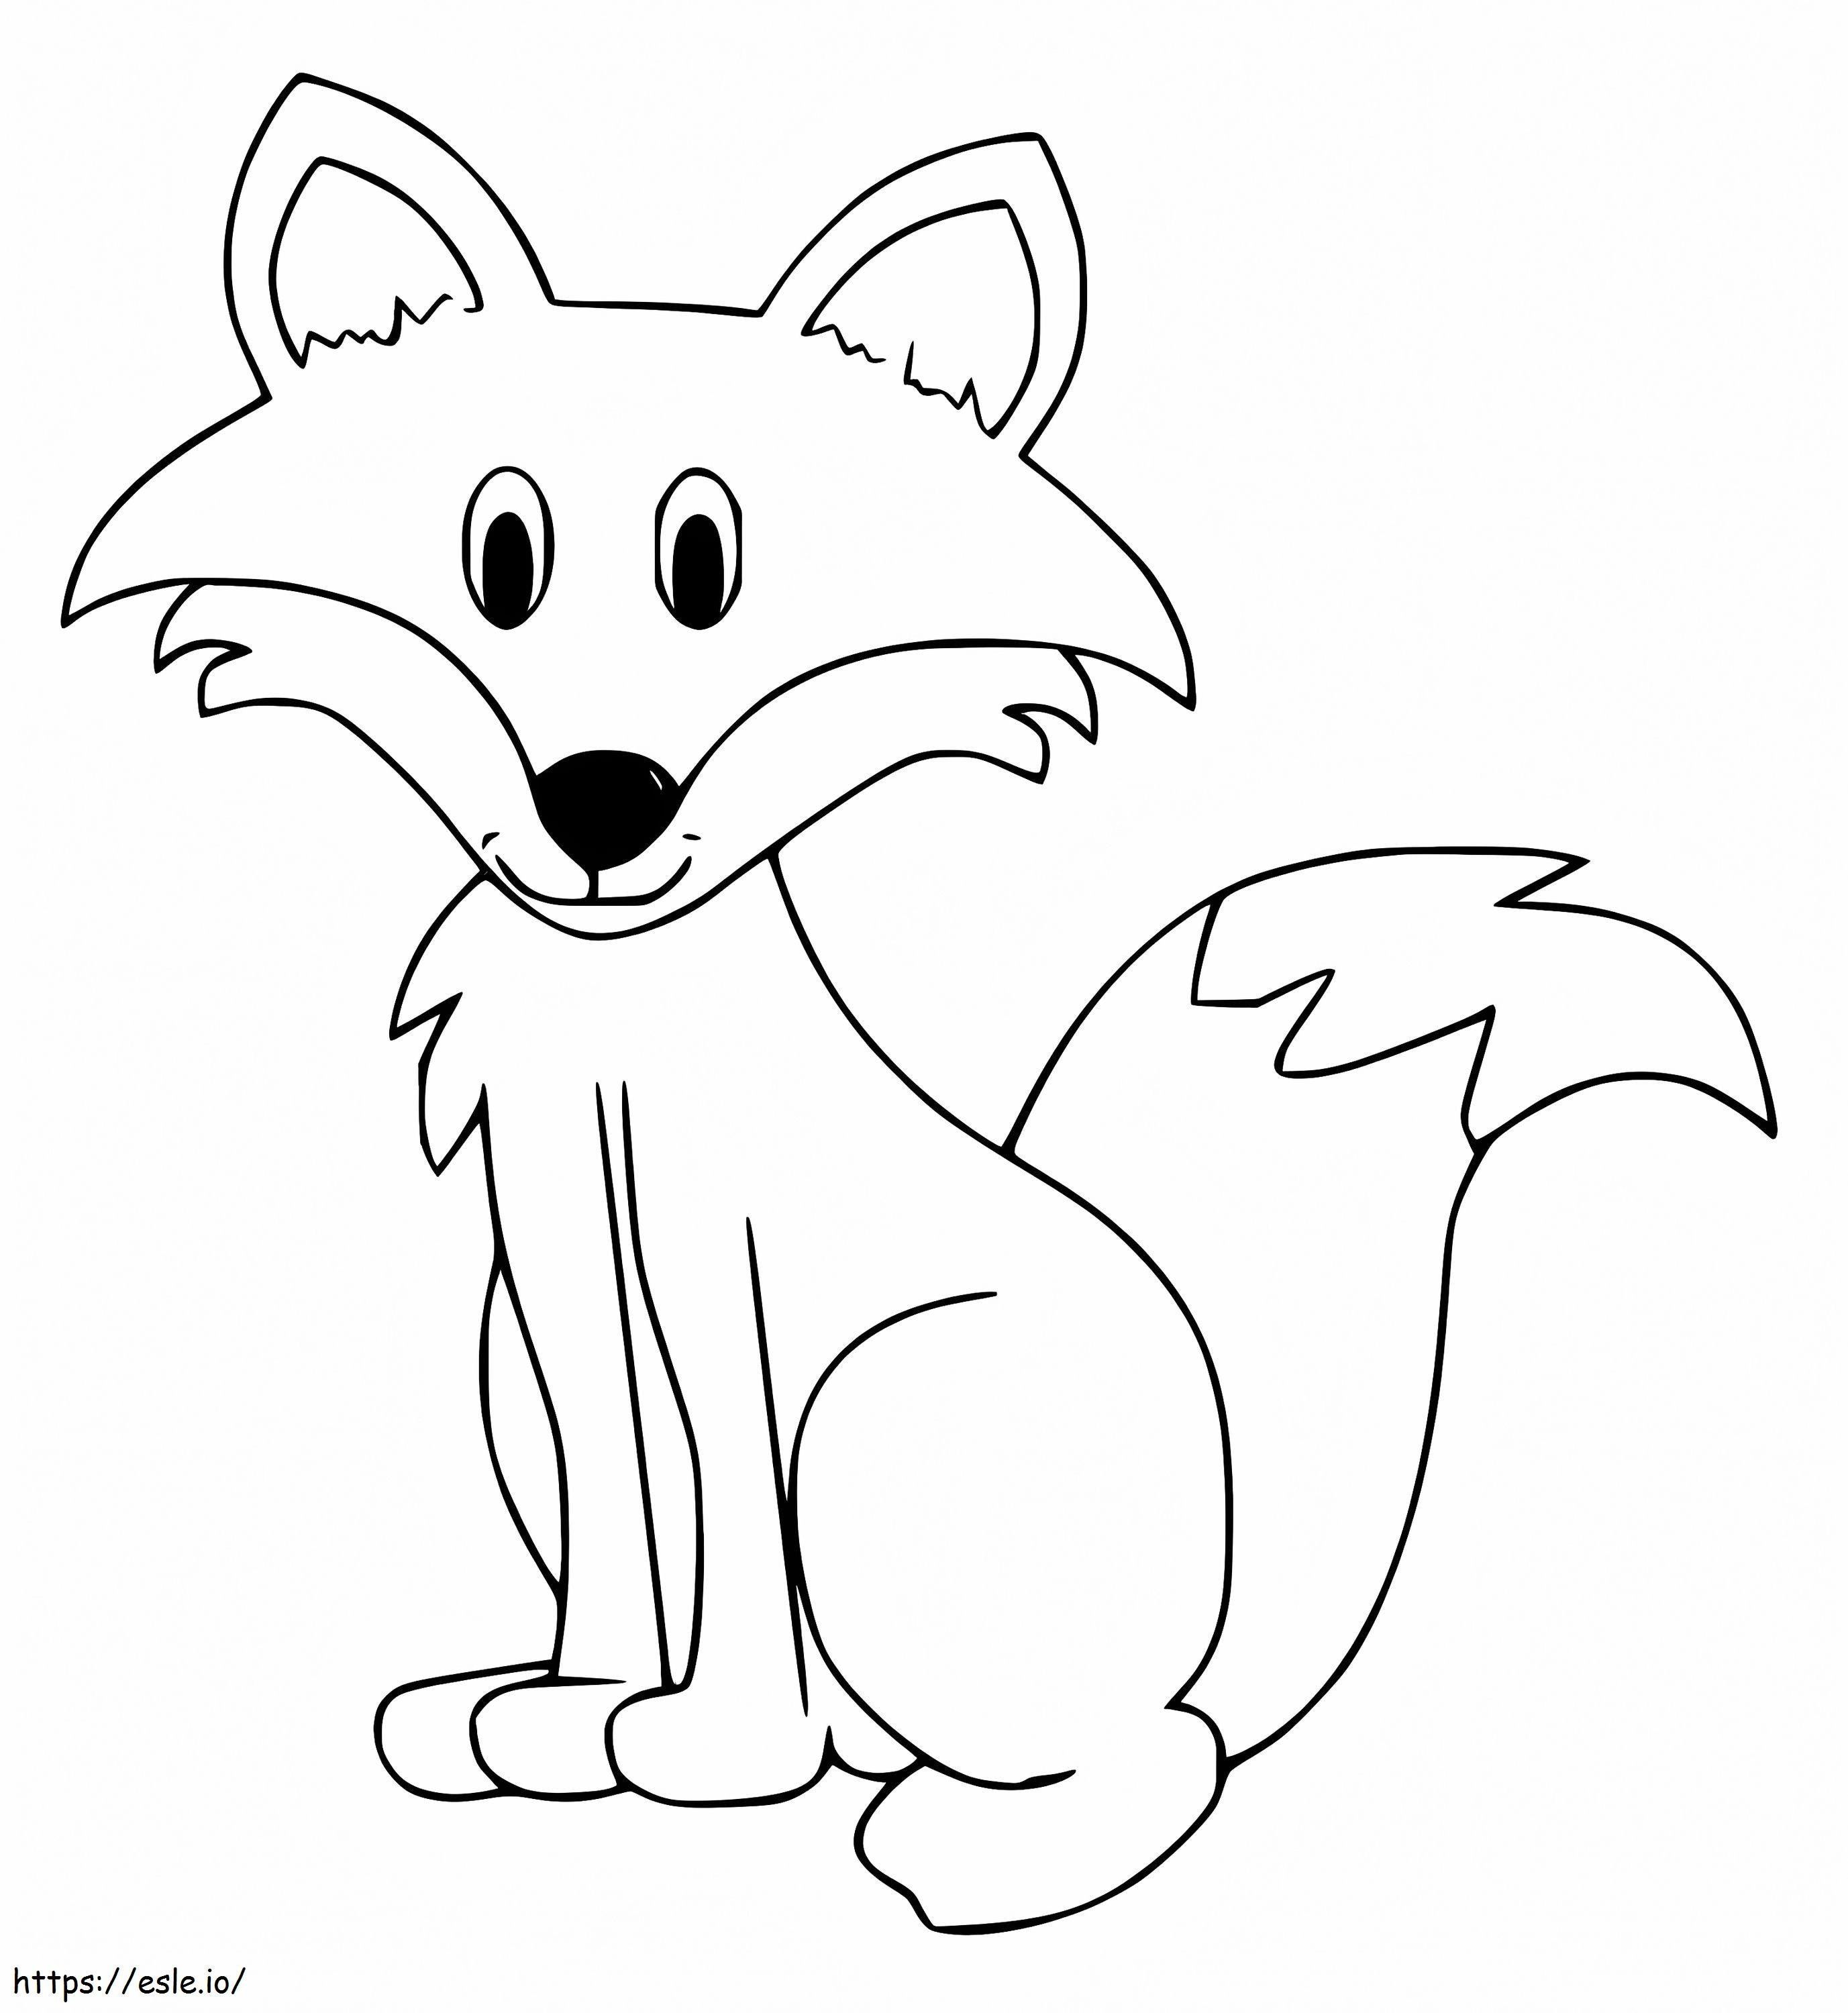 Cute Fox Confused coloring page